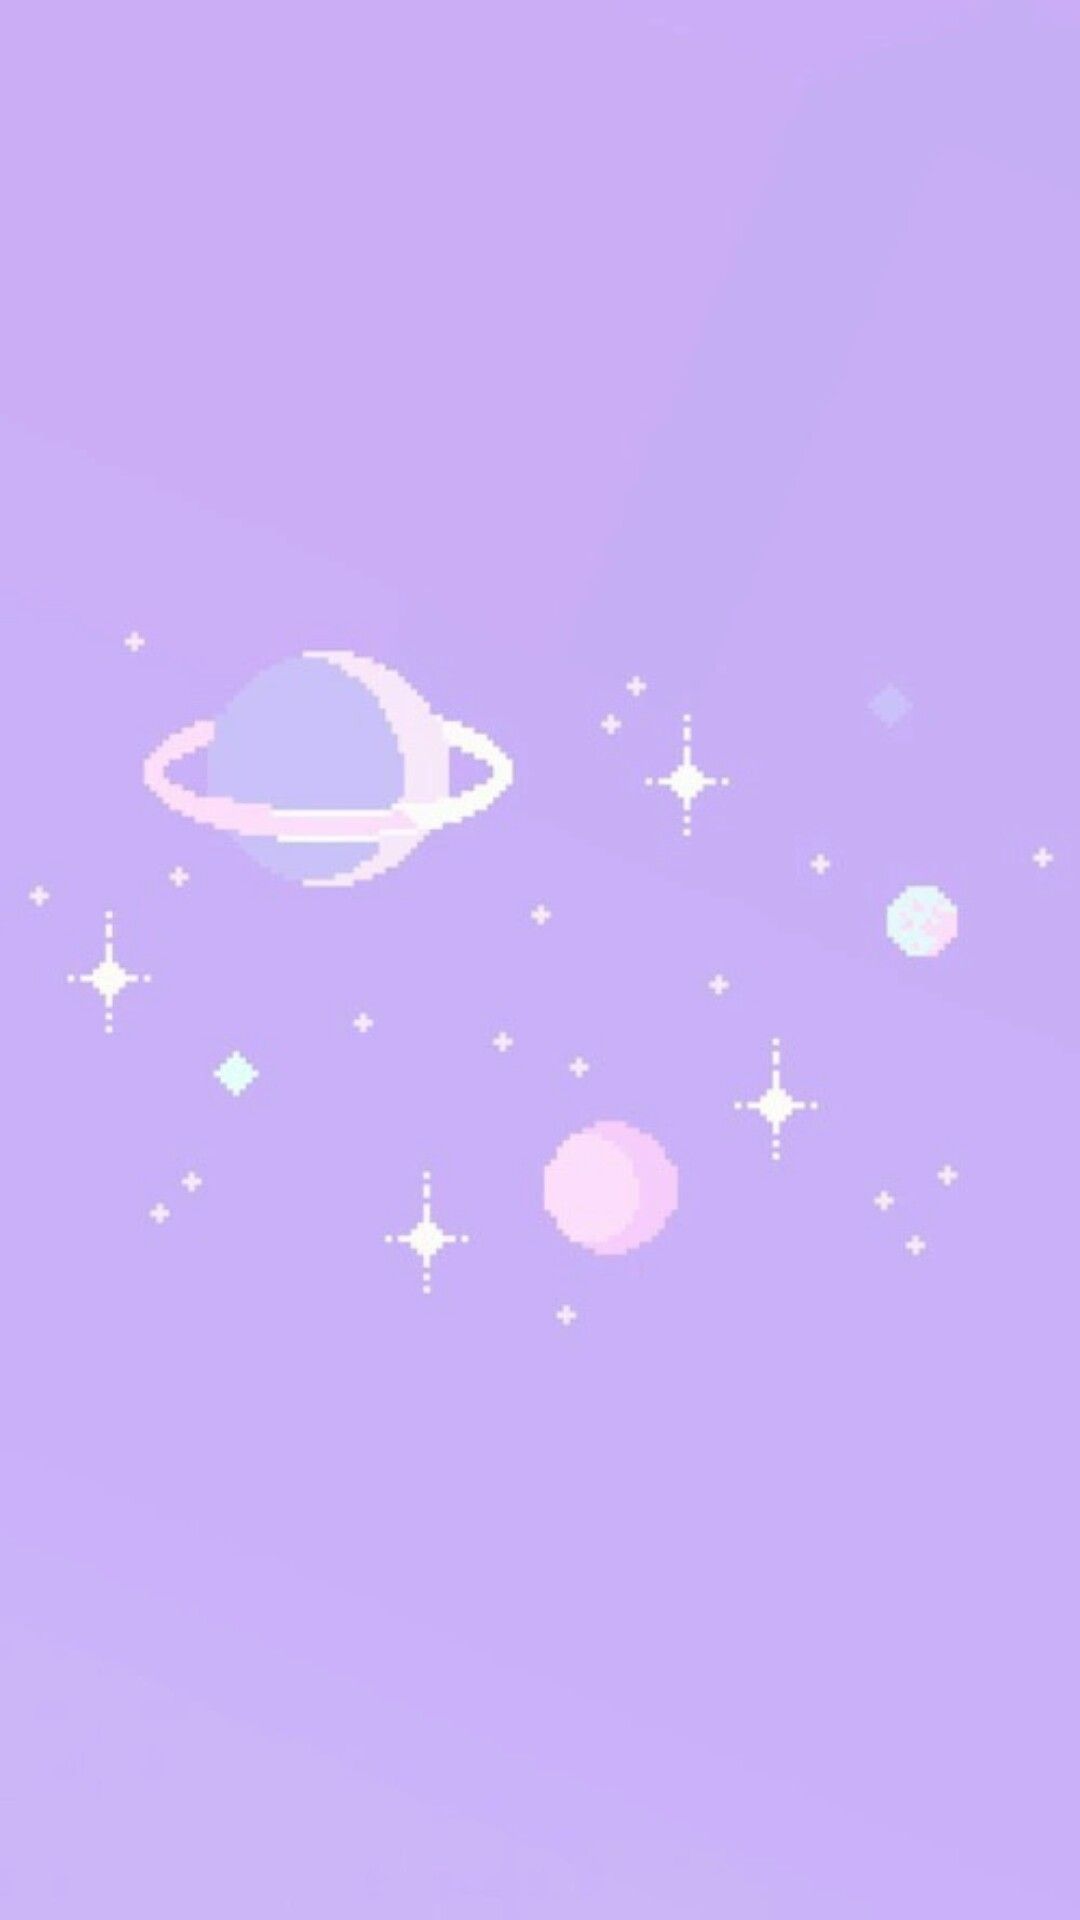 A purple background with stars and planets - Cute purple